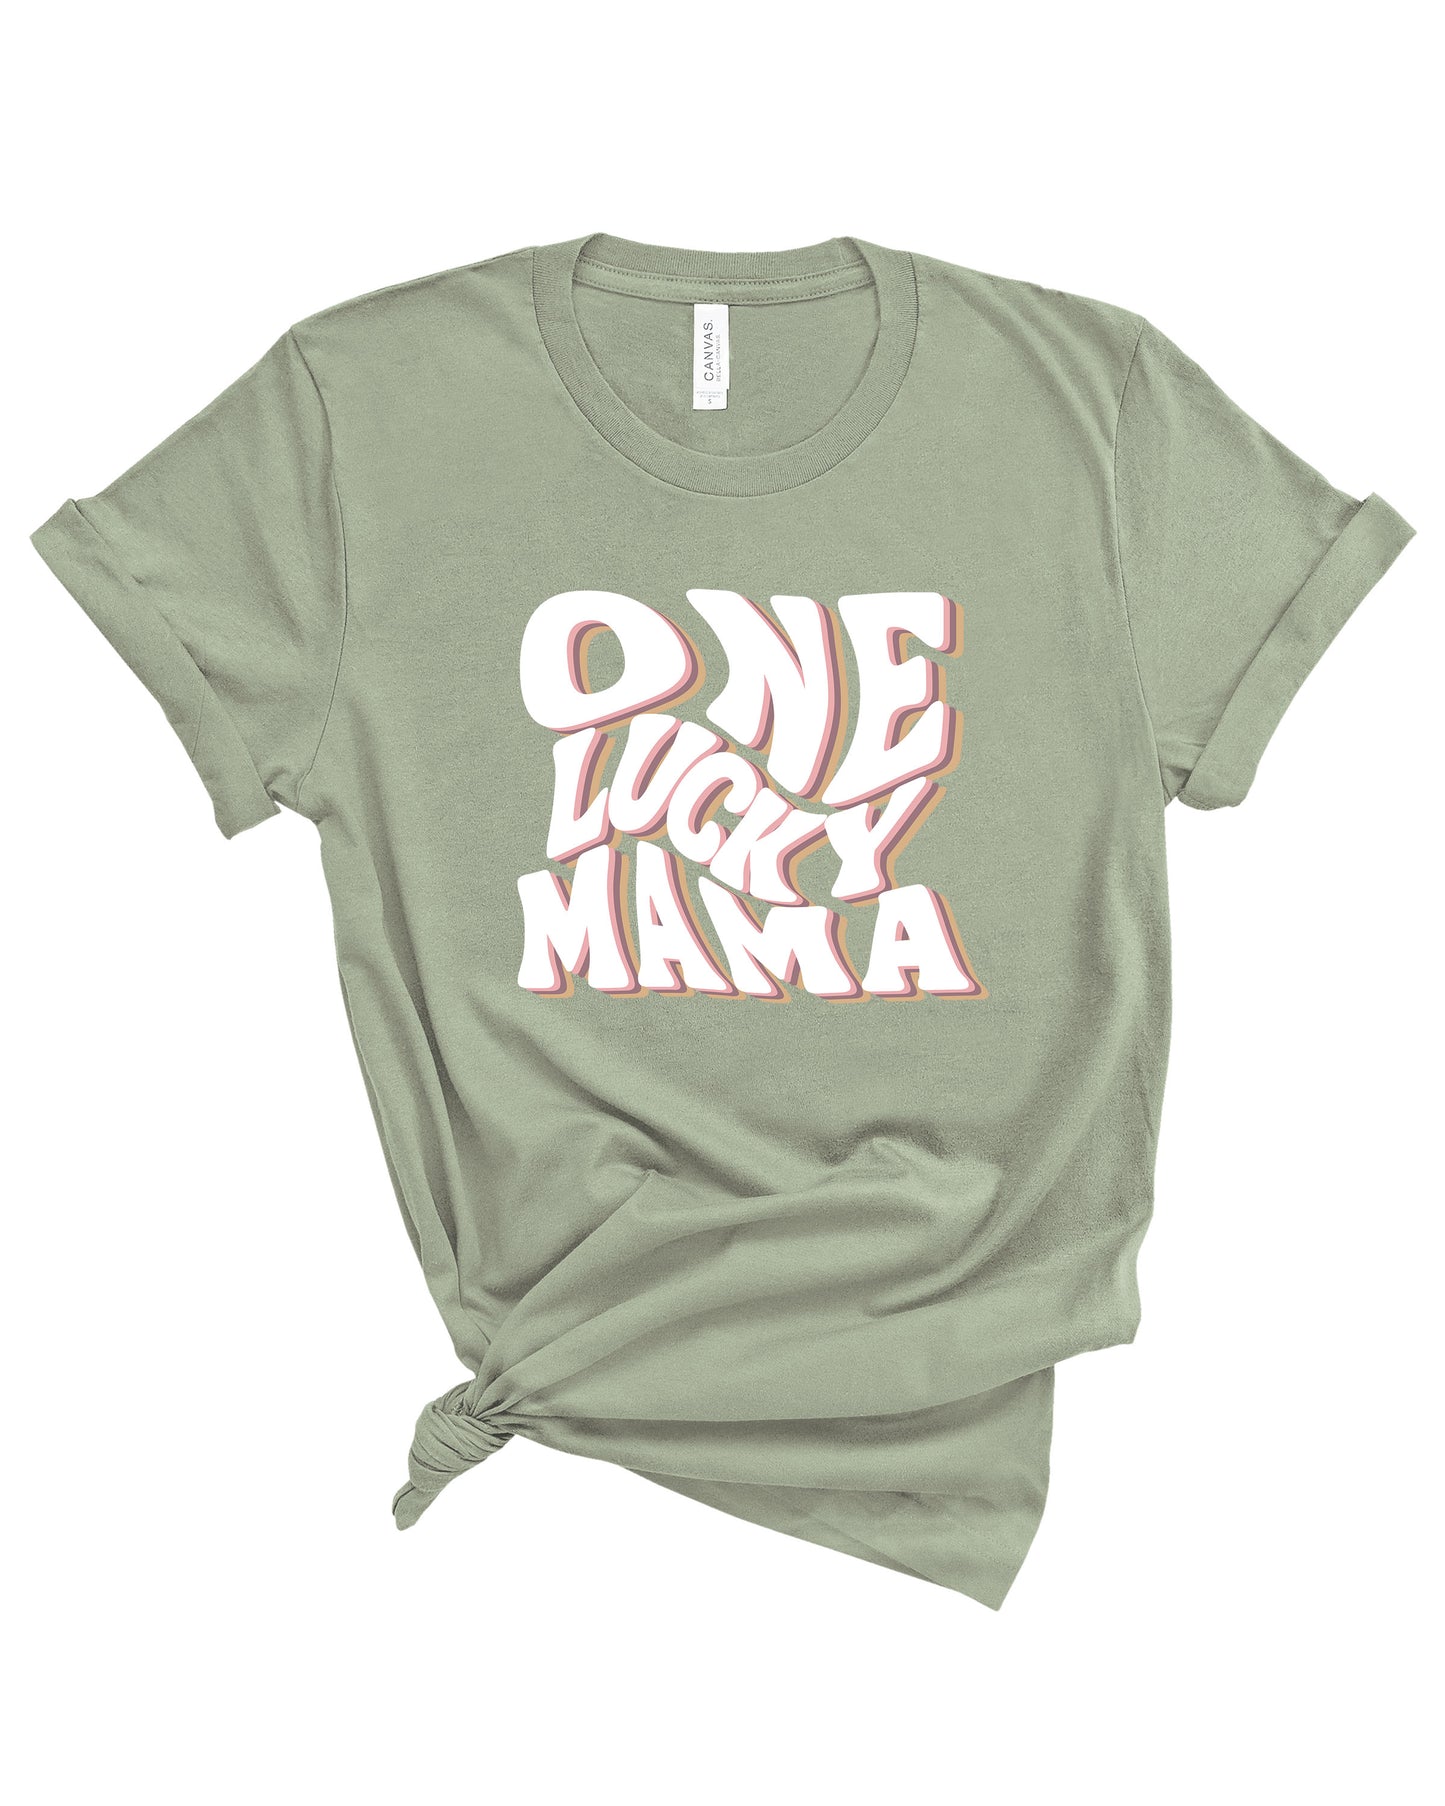 One Lucky Mama | Adult Tee-Adult Tee-Sister Shirts-Sister Shirts, Cute & Custom Tees for Mama & Littles in Trussville, Alabama.